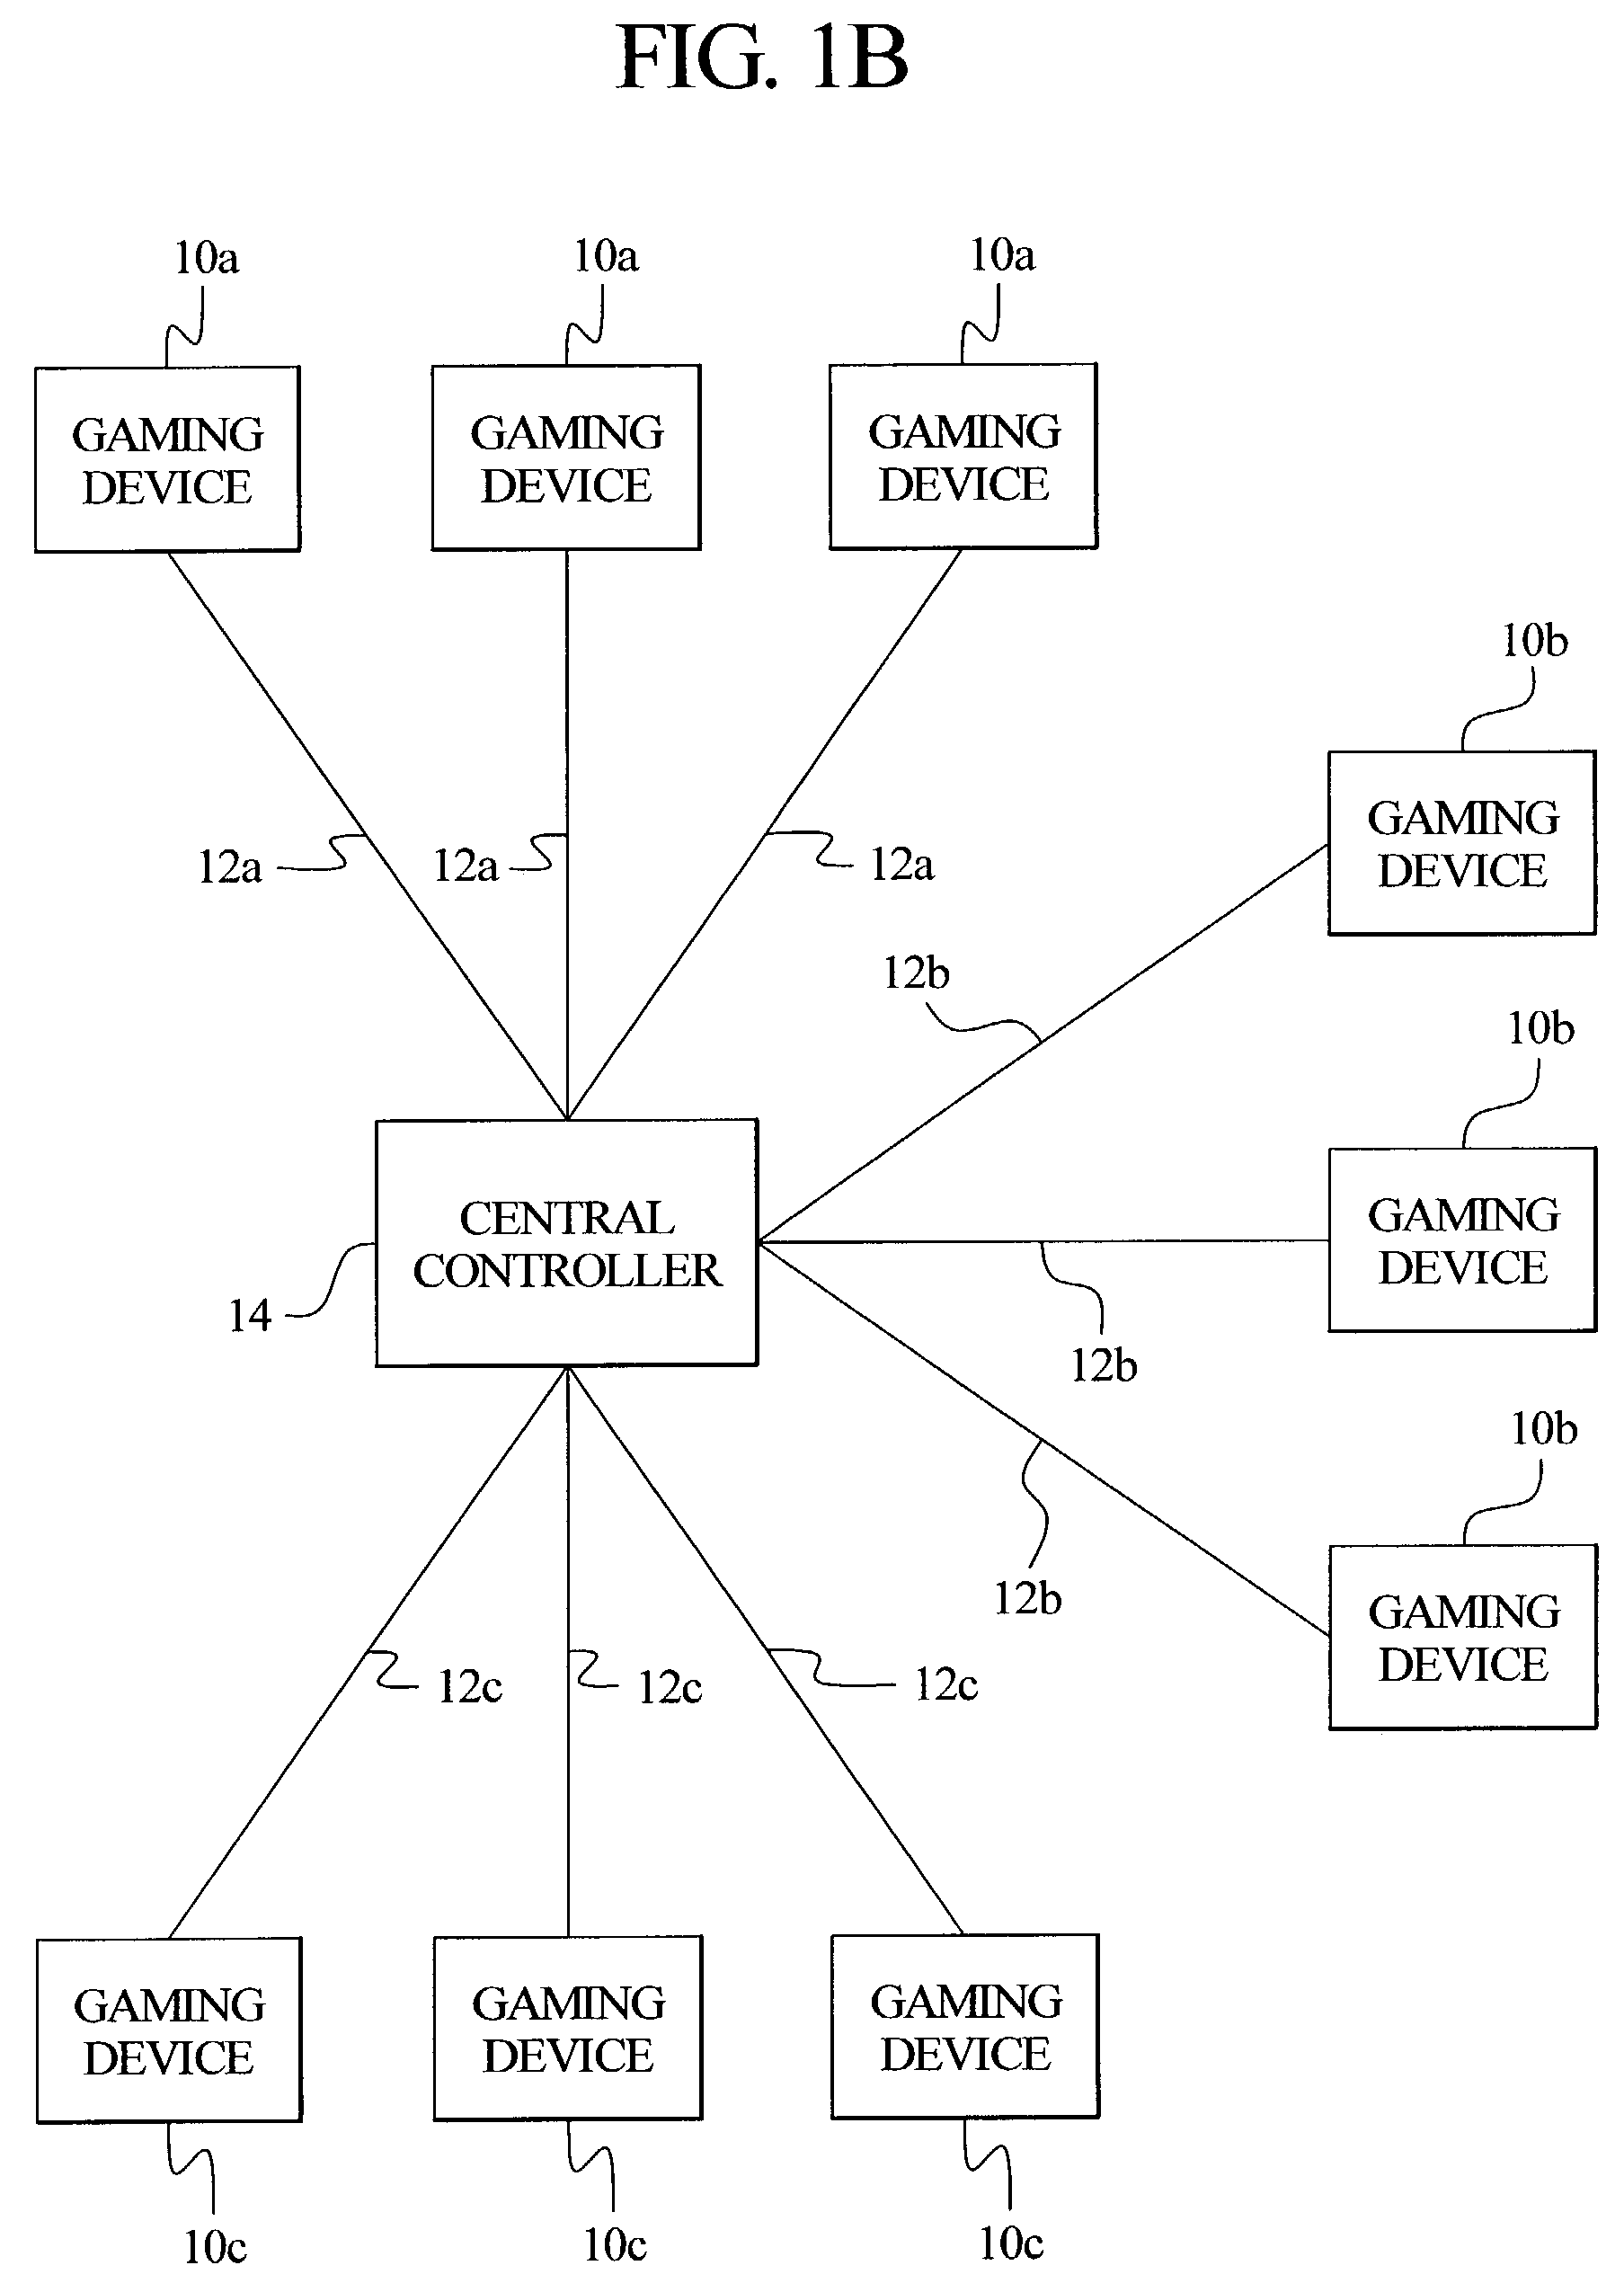 Central determination gaming system where the same seed is used to generate the outcomes for a primary game and a secondary game